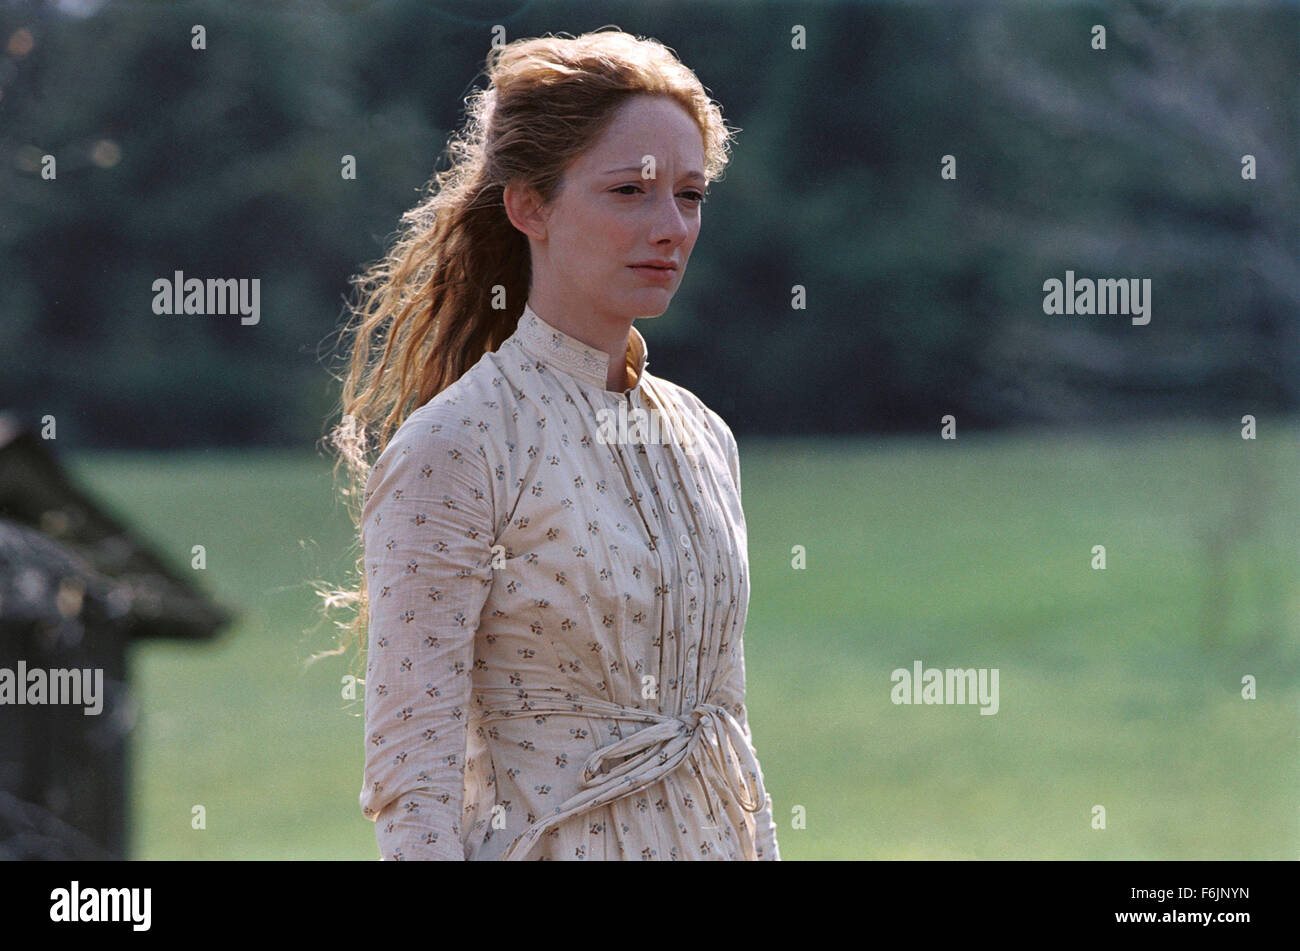 RELEASE DATE: July 30, 2004. MOVIE TITLE: The Village. STUDIO: Touchstone Pictures. PLOT: The population of a small, isolated countryside village believe that their alliance with the mysterious creatures that inhabit the forest around them is coming to an end. PICTURED: JUDY GREER who plays Kitty Walker. Stock Photo